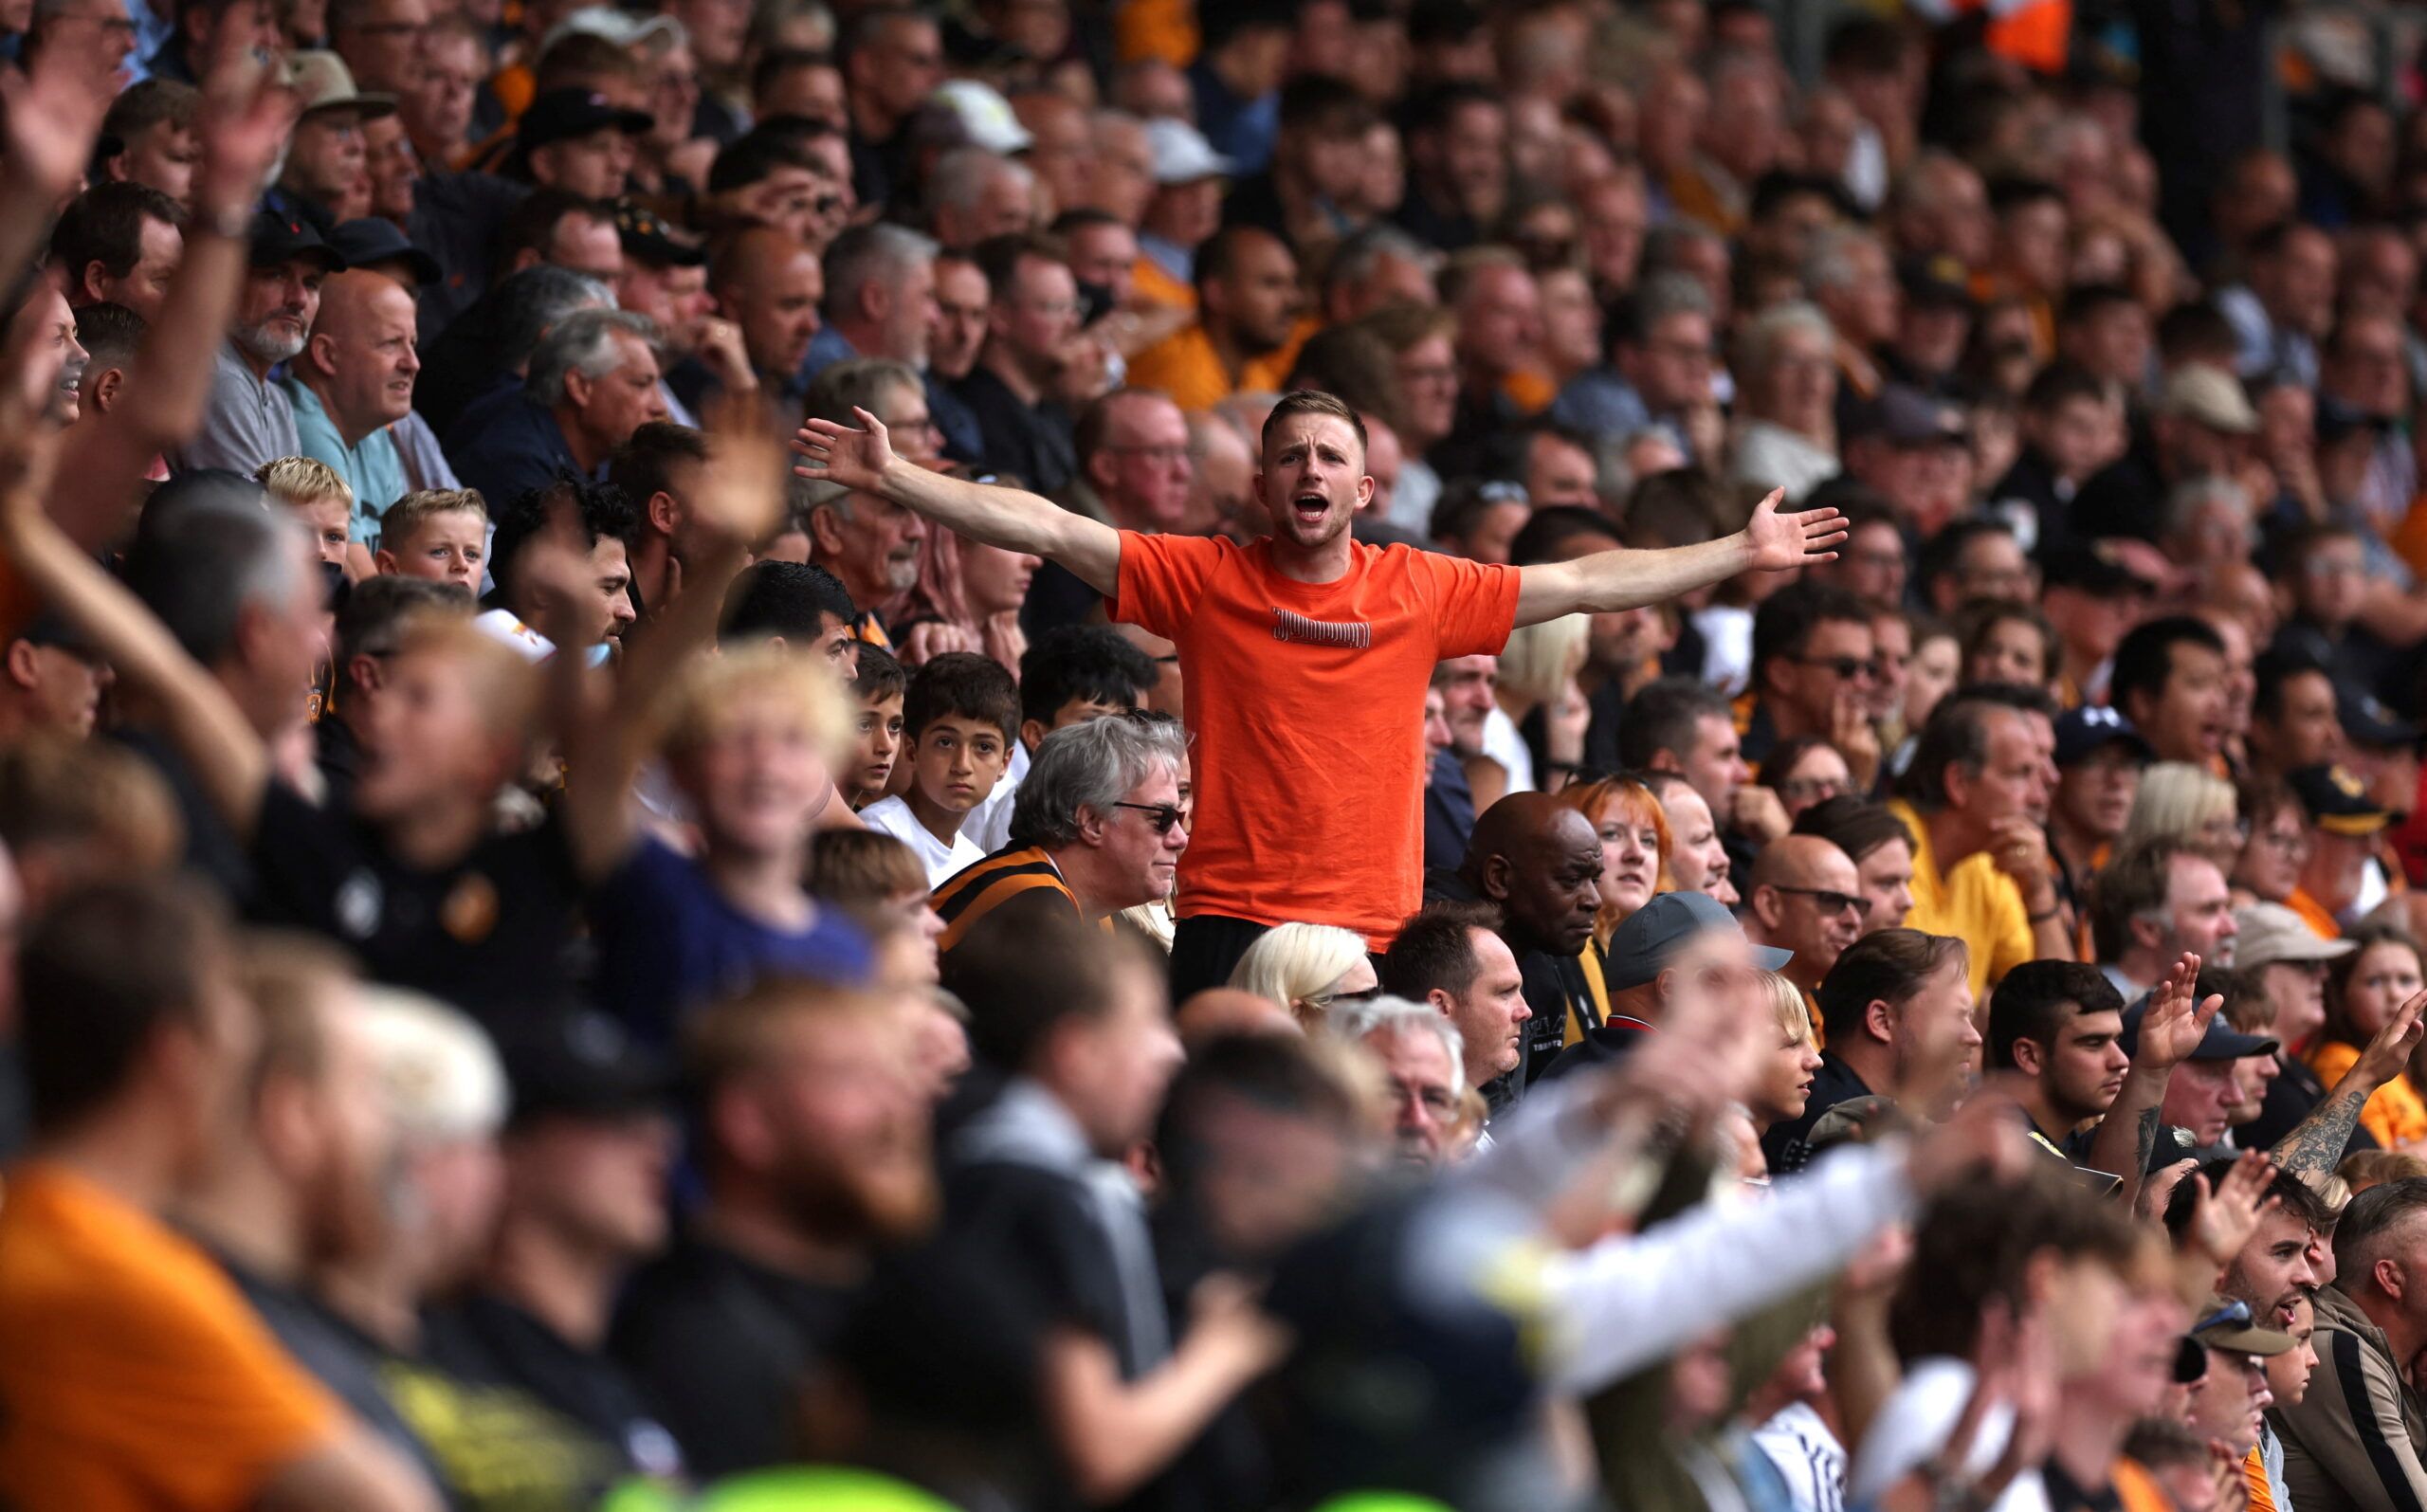 Soccer Football - Championship - Hull City v Sheffield United - MKM Stadium, Hull, Britain - September 4, 2022  Fans during the match    Action Images/Lee Smith  EDITORIAL USE ONLY. No use with unauthorized audio, video, data, fixture lists, club/league logos or 